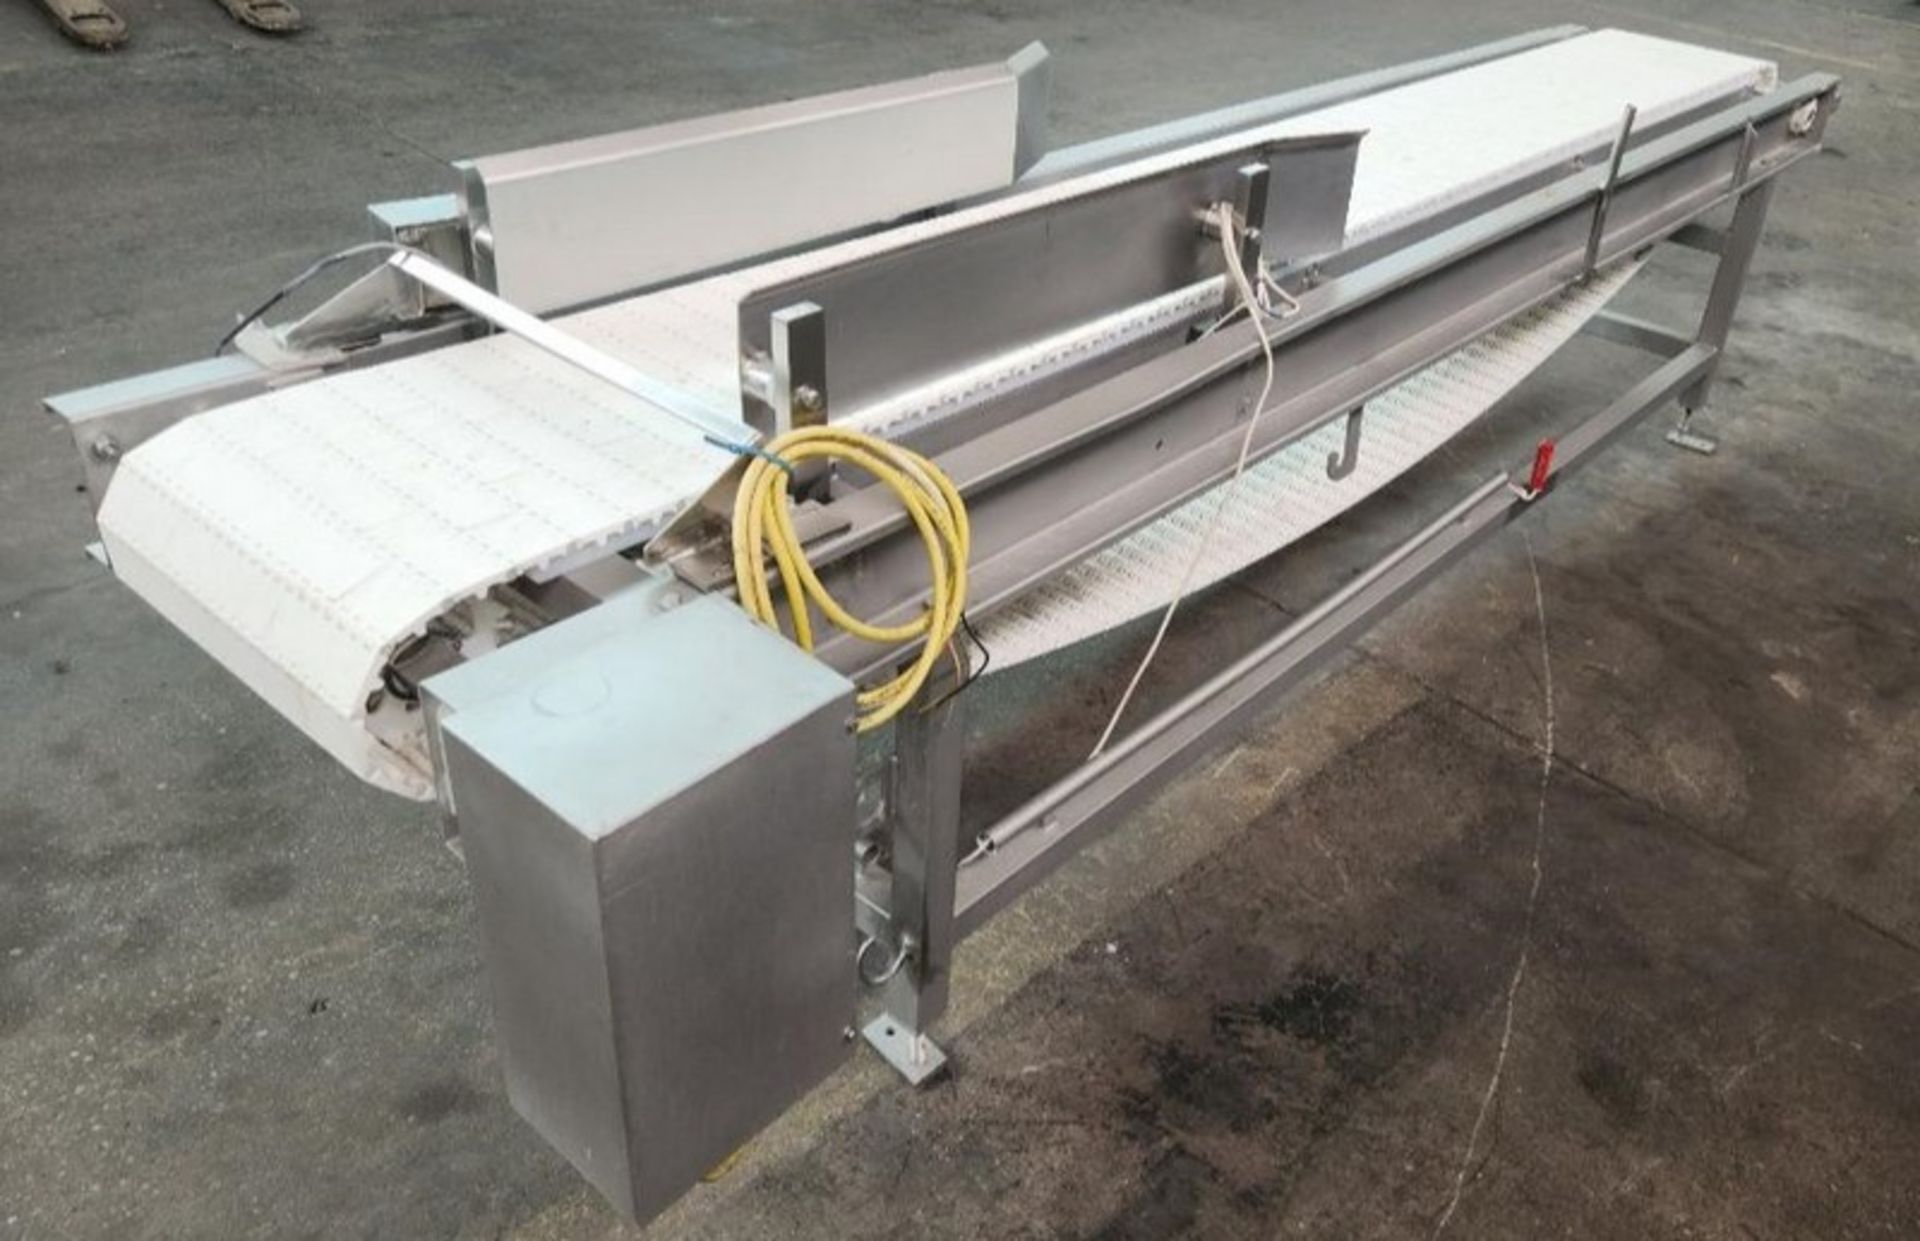 Aprox. 15" 126" L White Intralox Belt Conveyor with 32" Infeed and Discharge Height. Infeed and